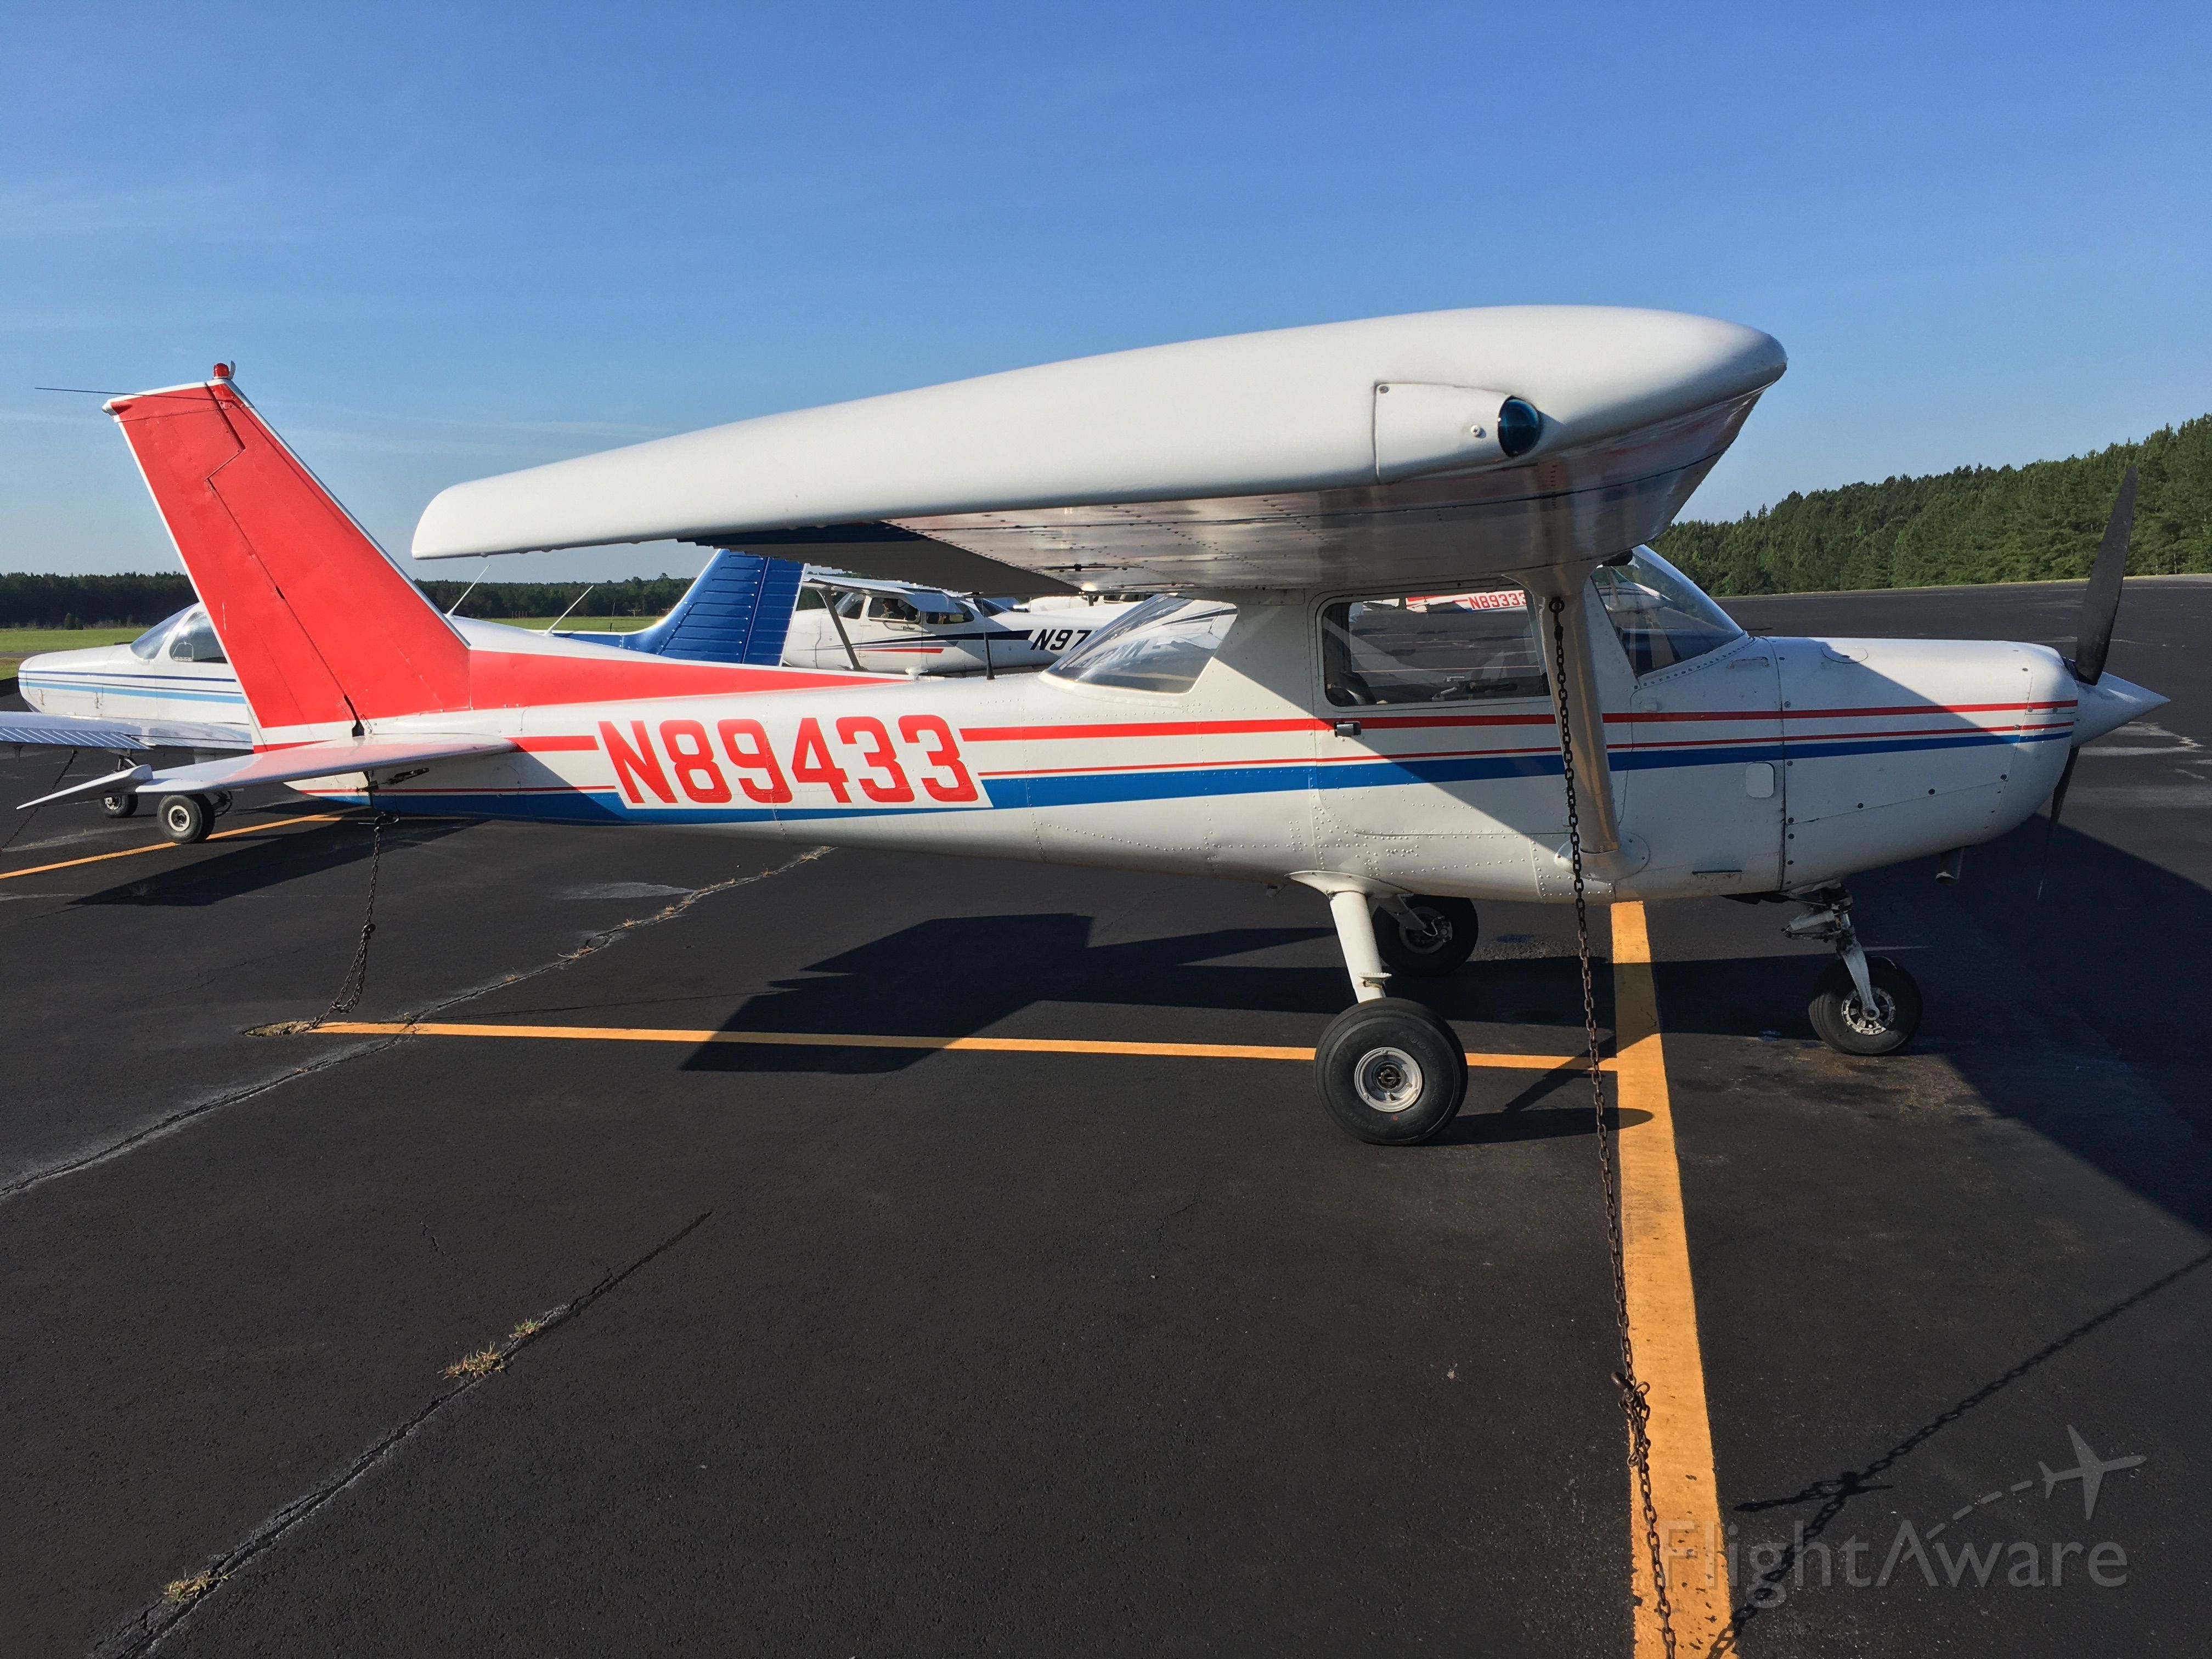 Cessna 152 (N89433) - Getting ready for my first cross-country flight! In this Cessna 152, N89433. Taken July 3, 2020.